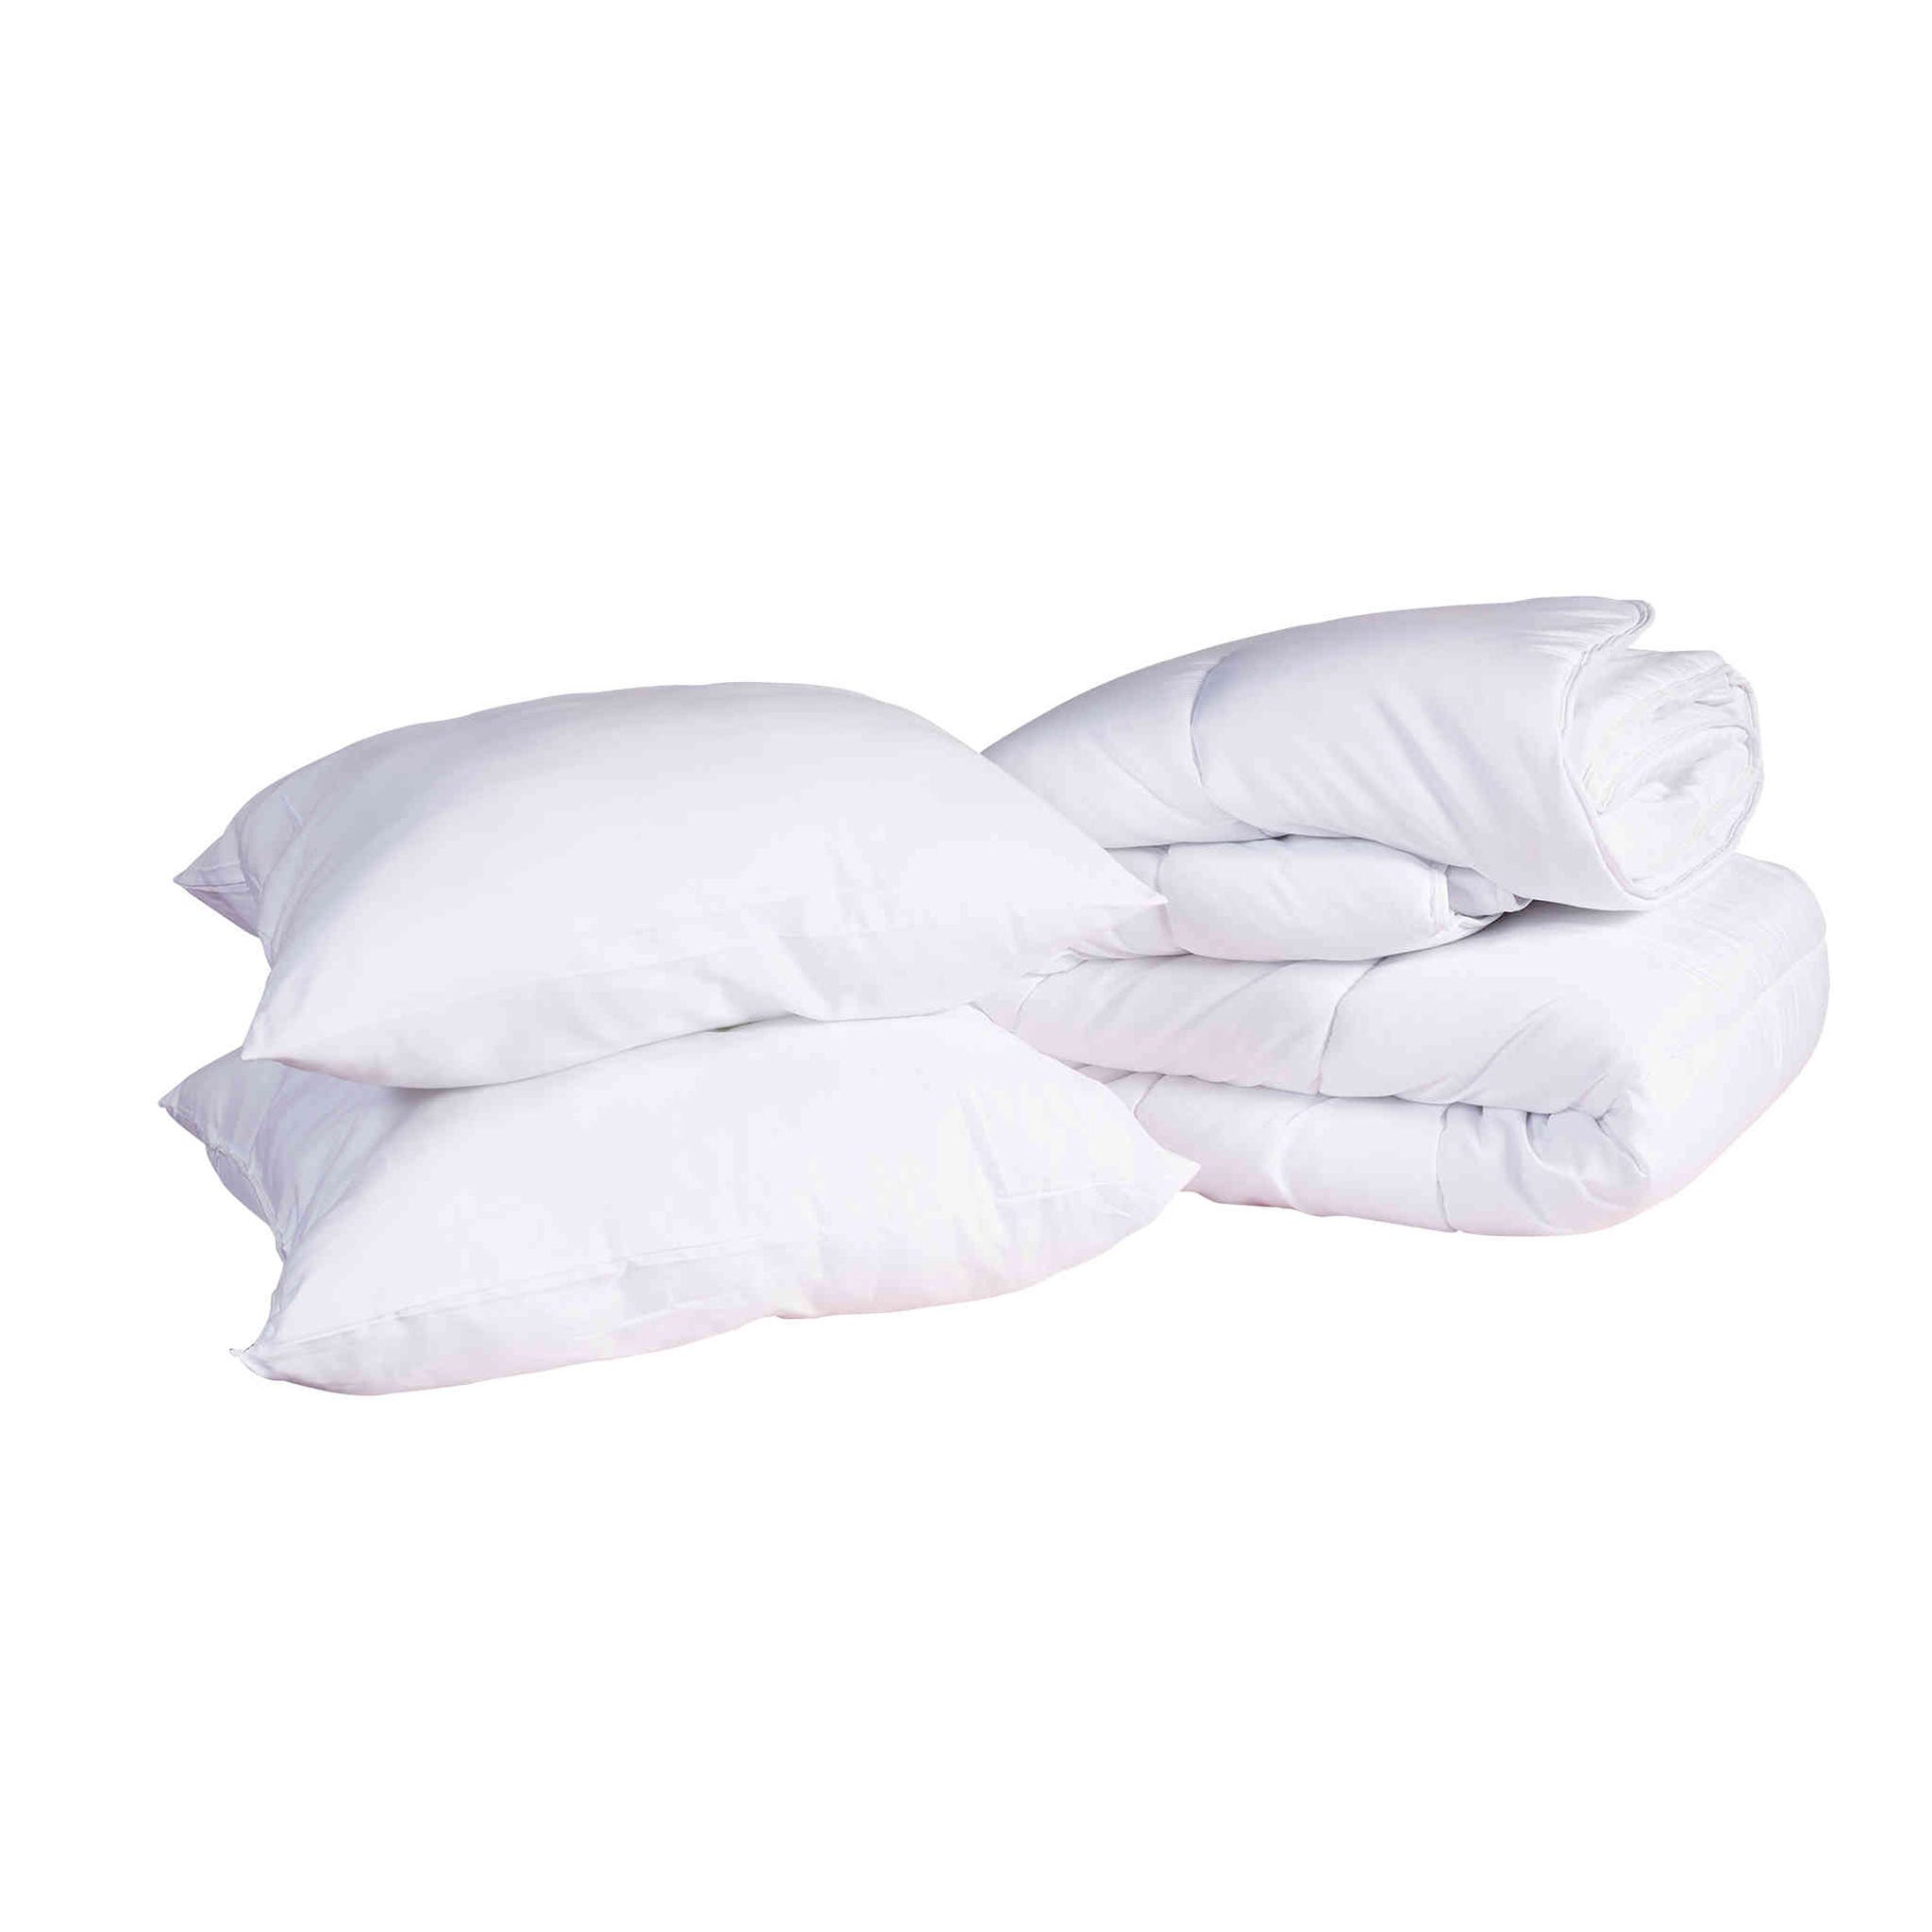 Couette moelleuse hiver 450g microfibres